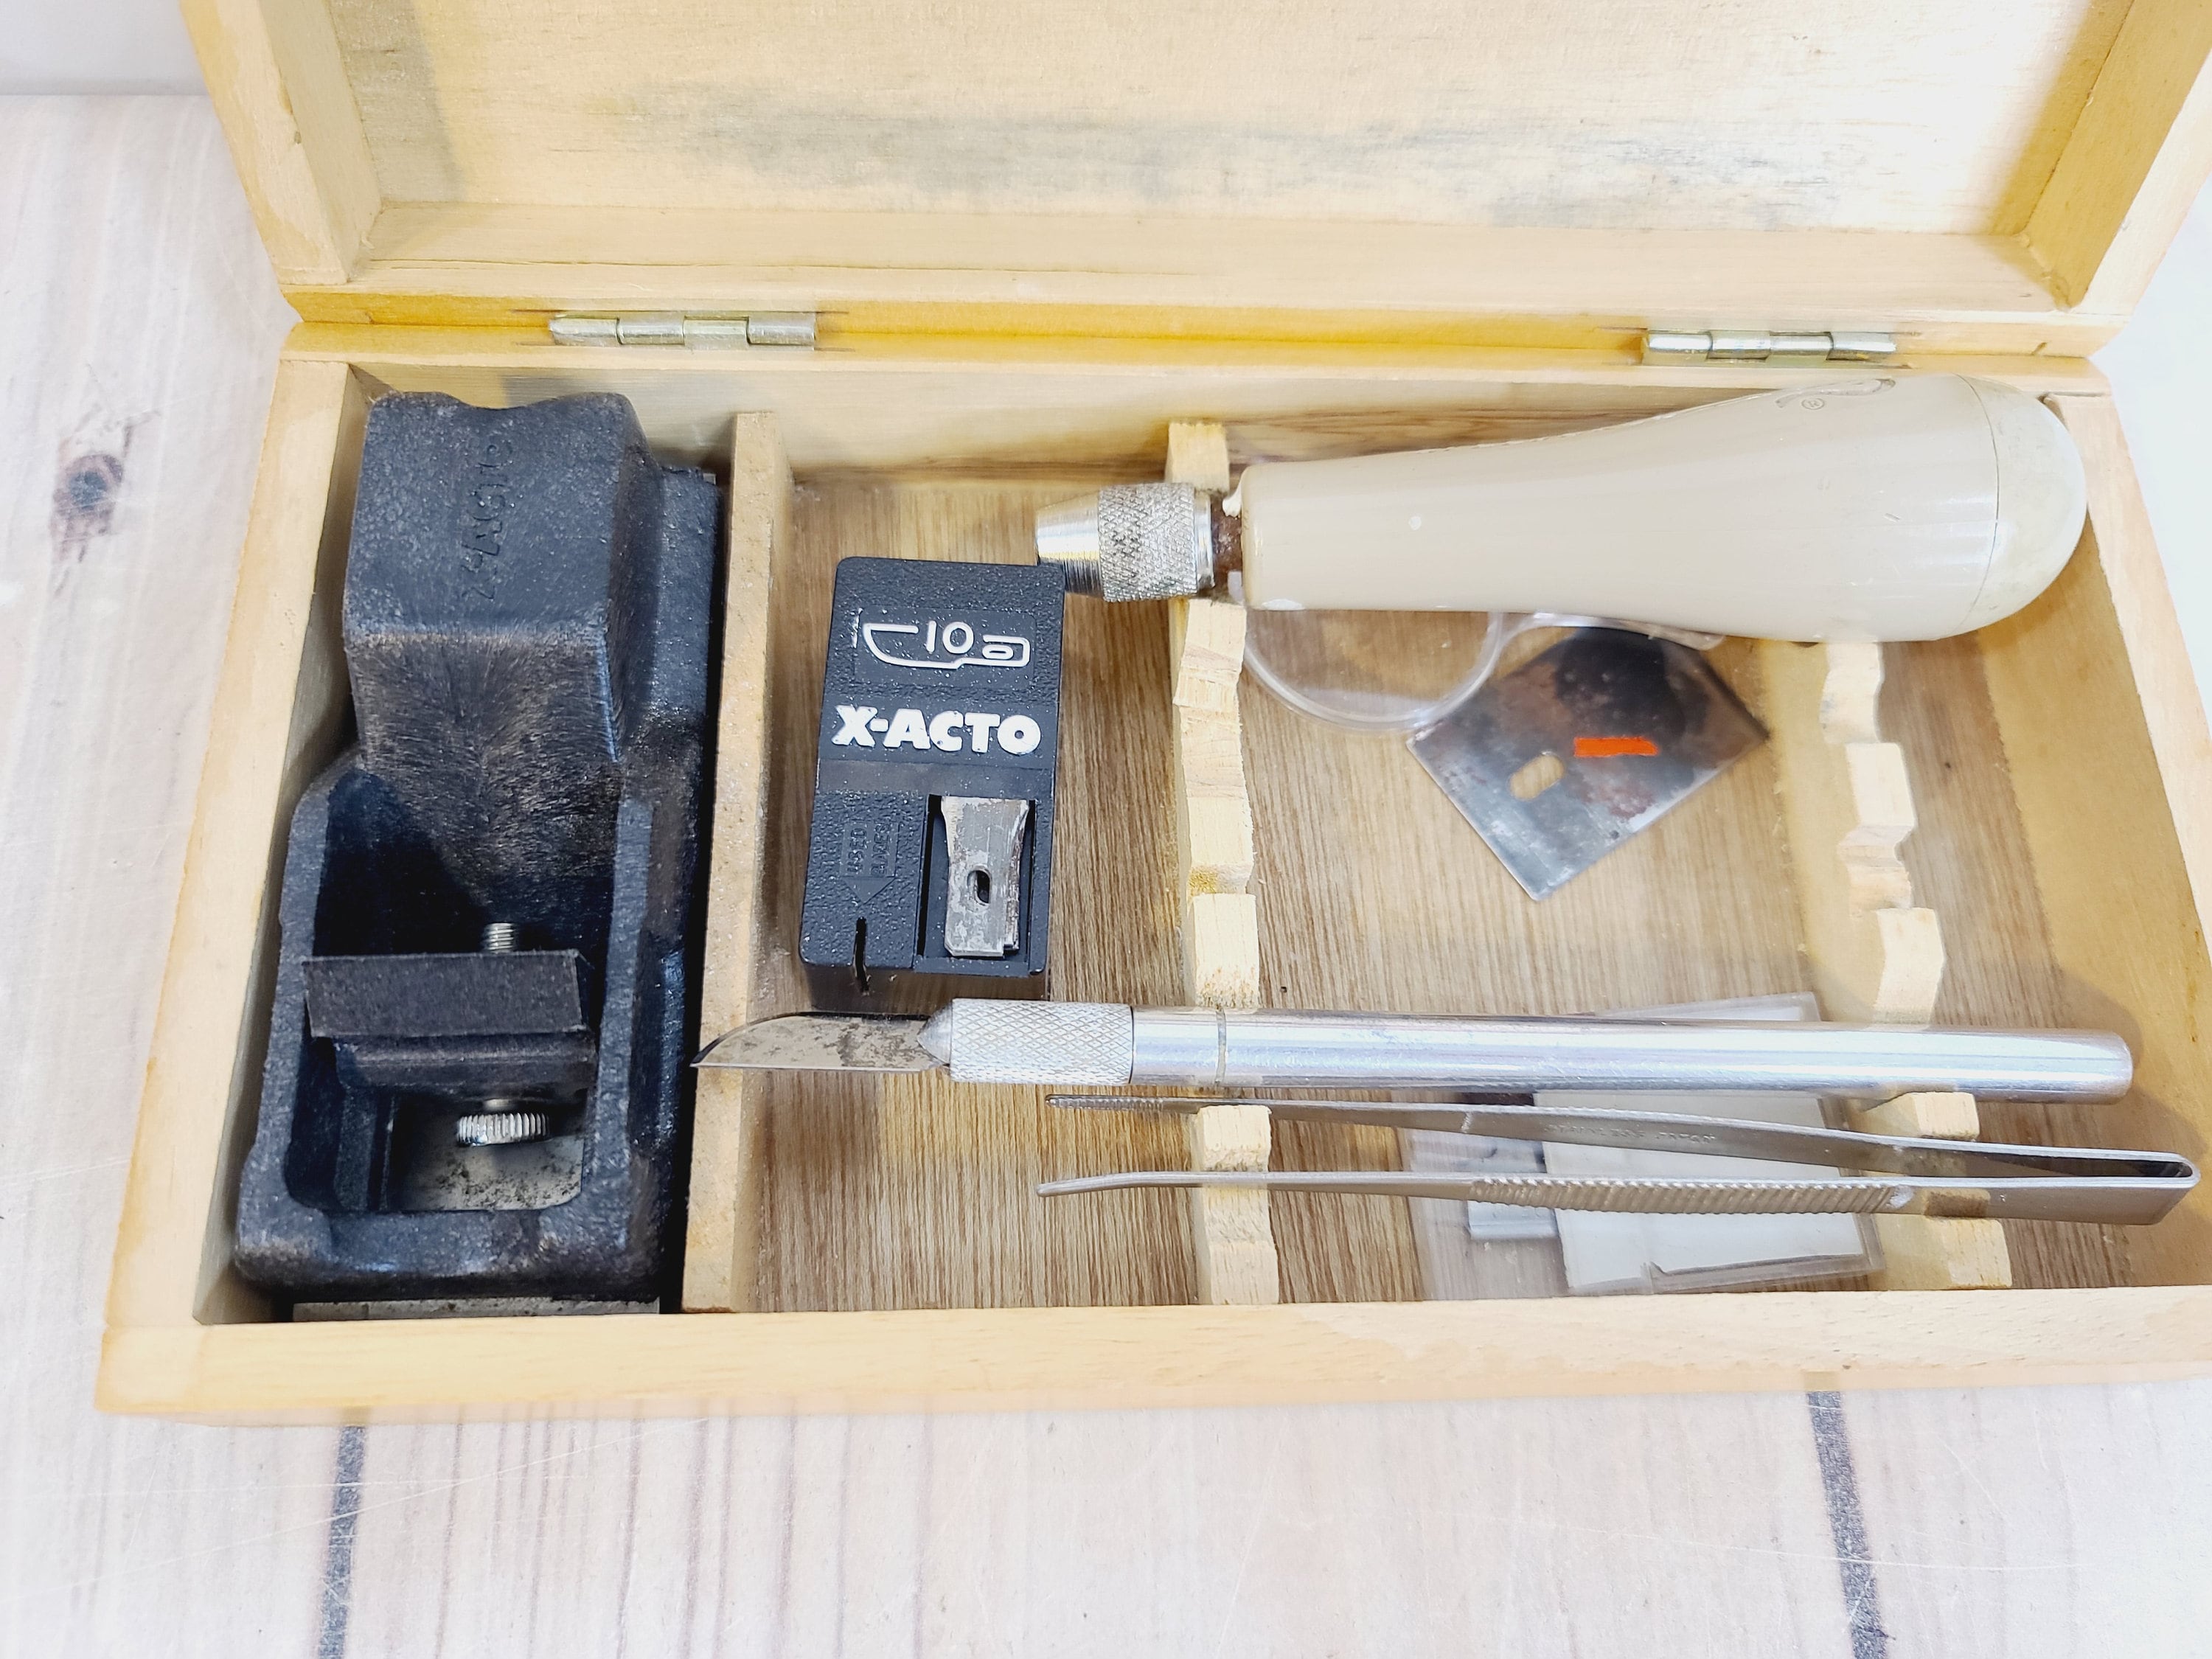 Vintage X-acto Knife, Drill, Saw, Filing Plane, Pliers, Hammer And Blade Set  In Original Wooden Box #55923